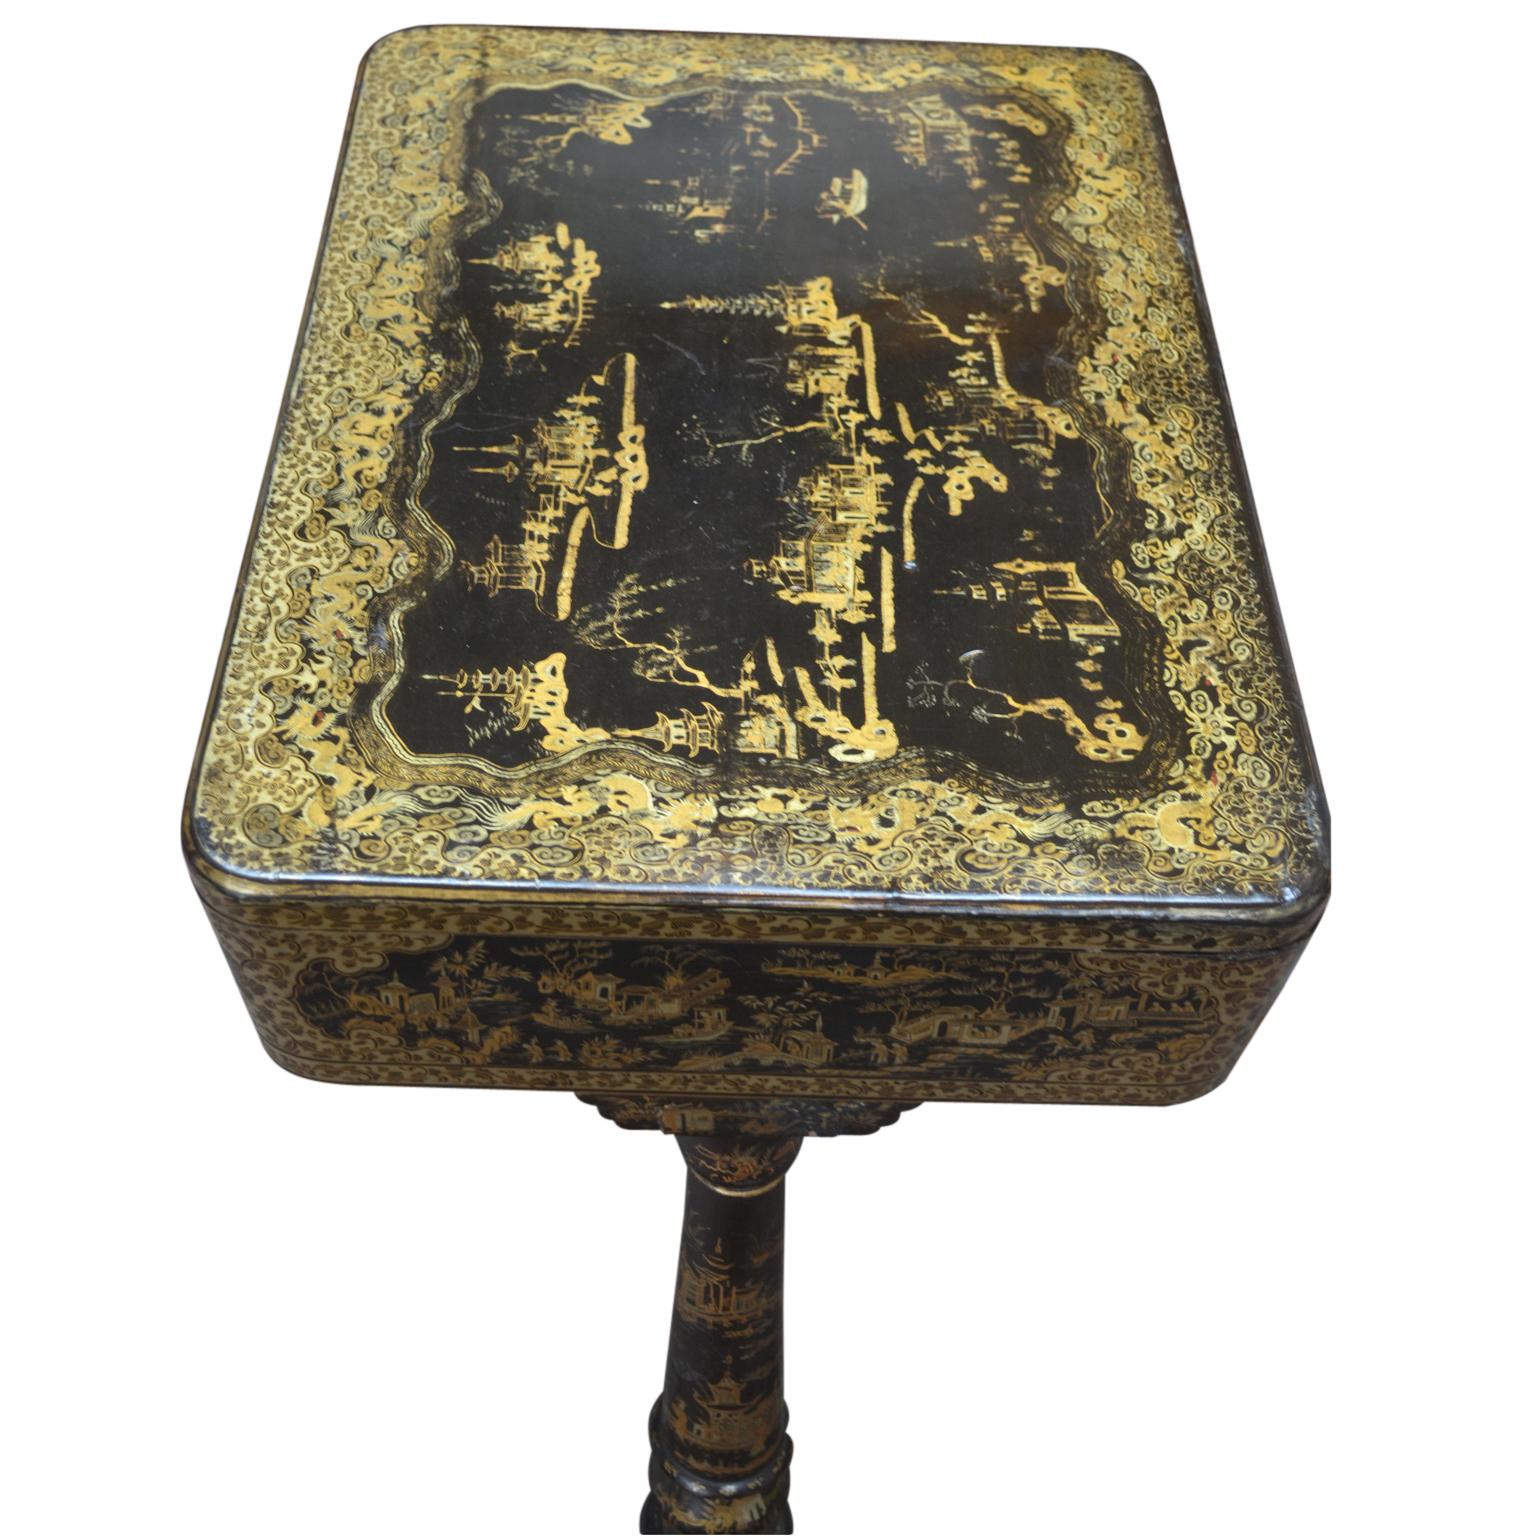 Hand-Painted 19th Century Chinese Export Black and Gold Lacquer Sewing Table